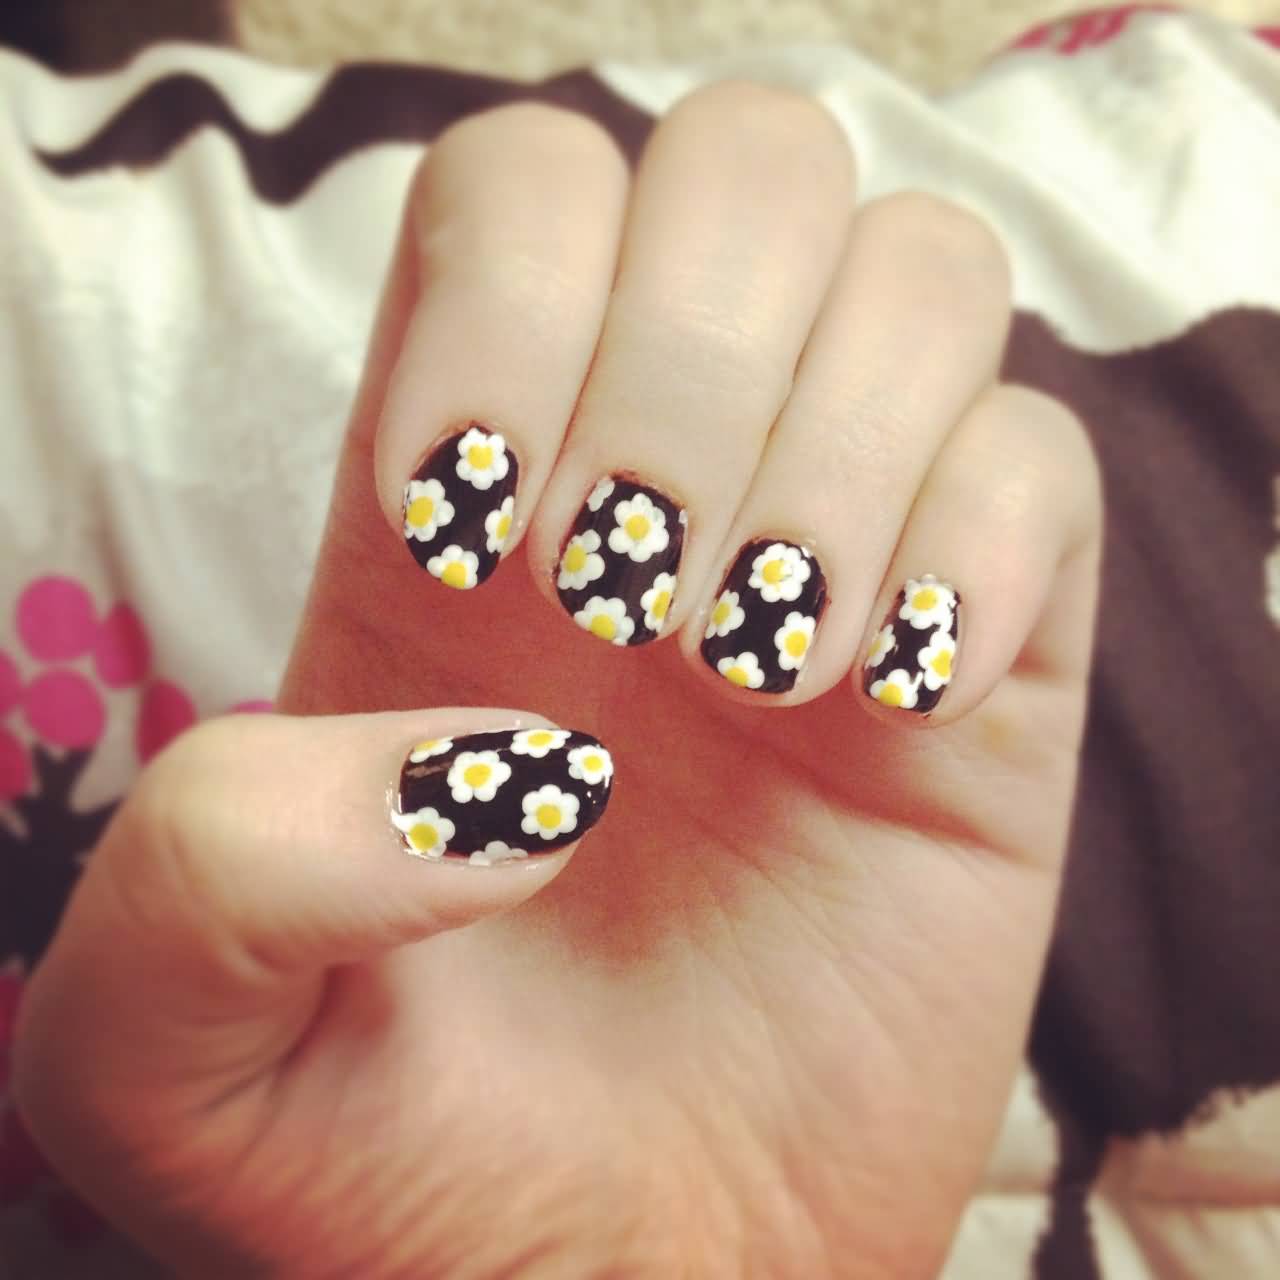 Black Base Nails And White Spring Flowers Nail Art